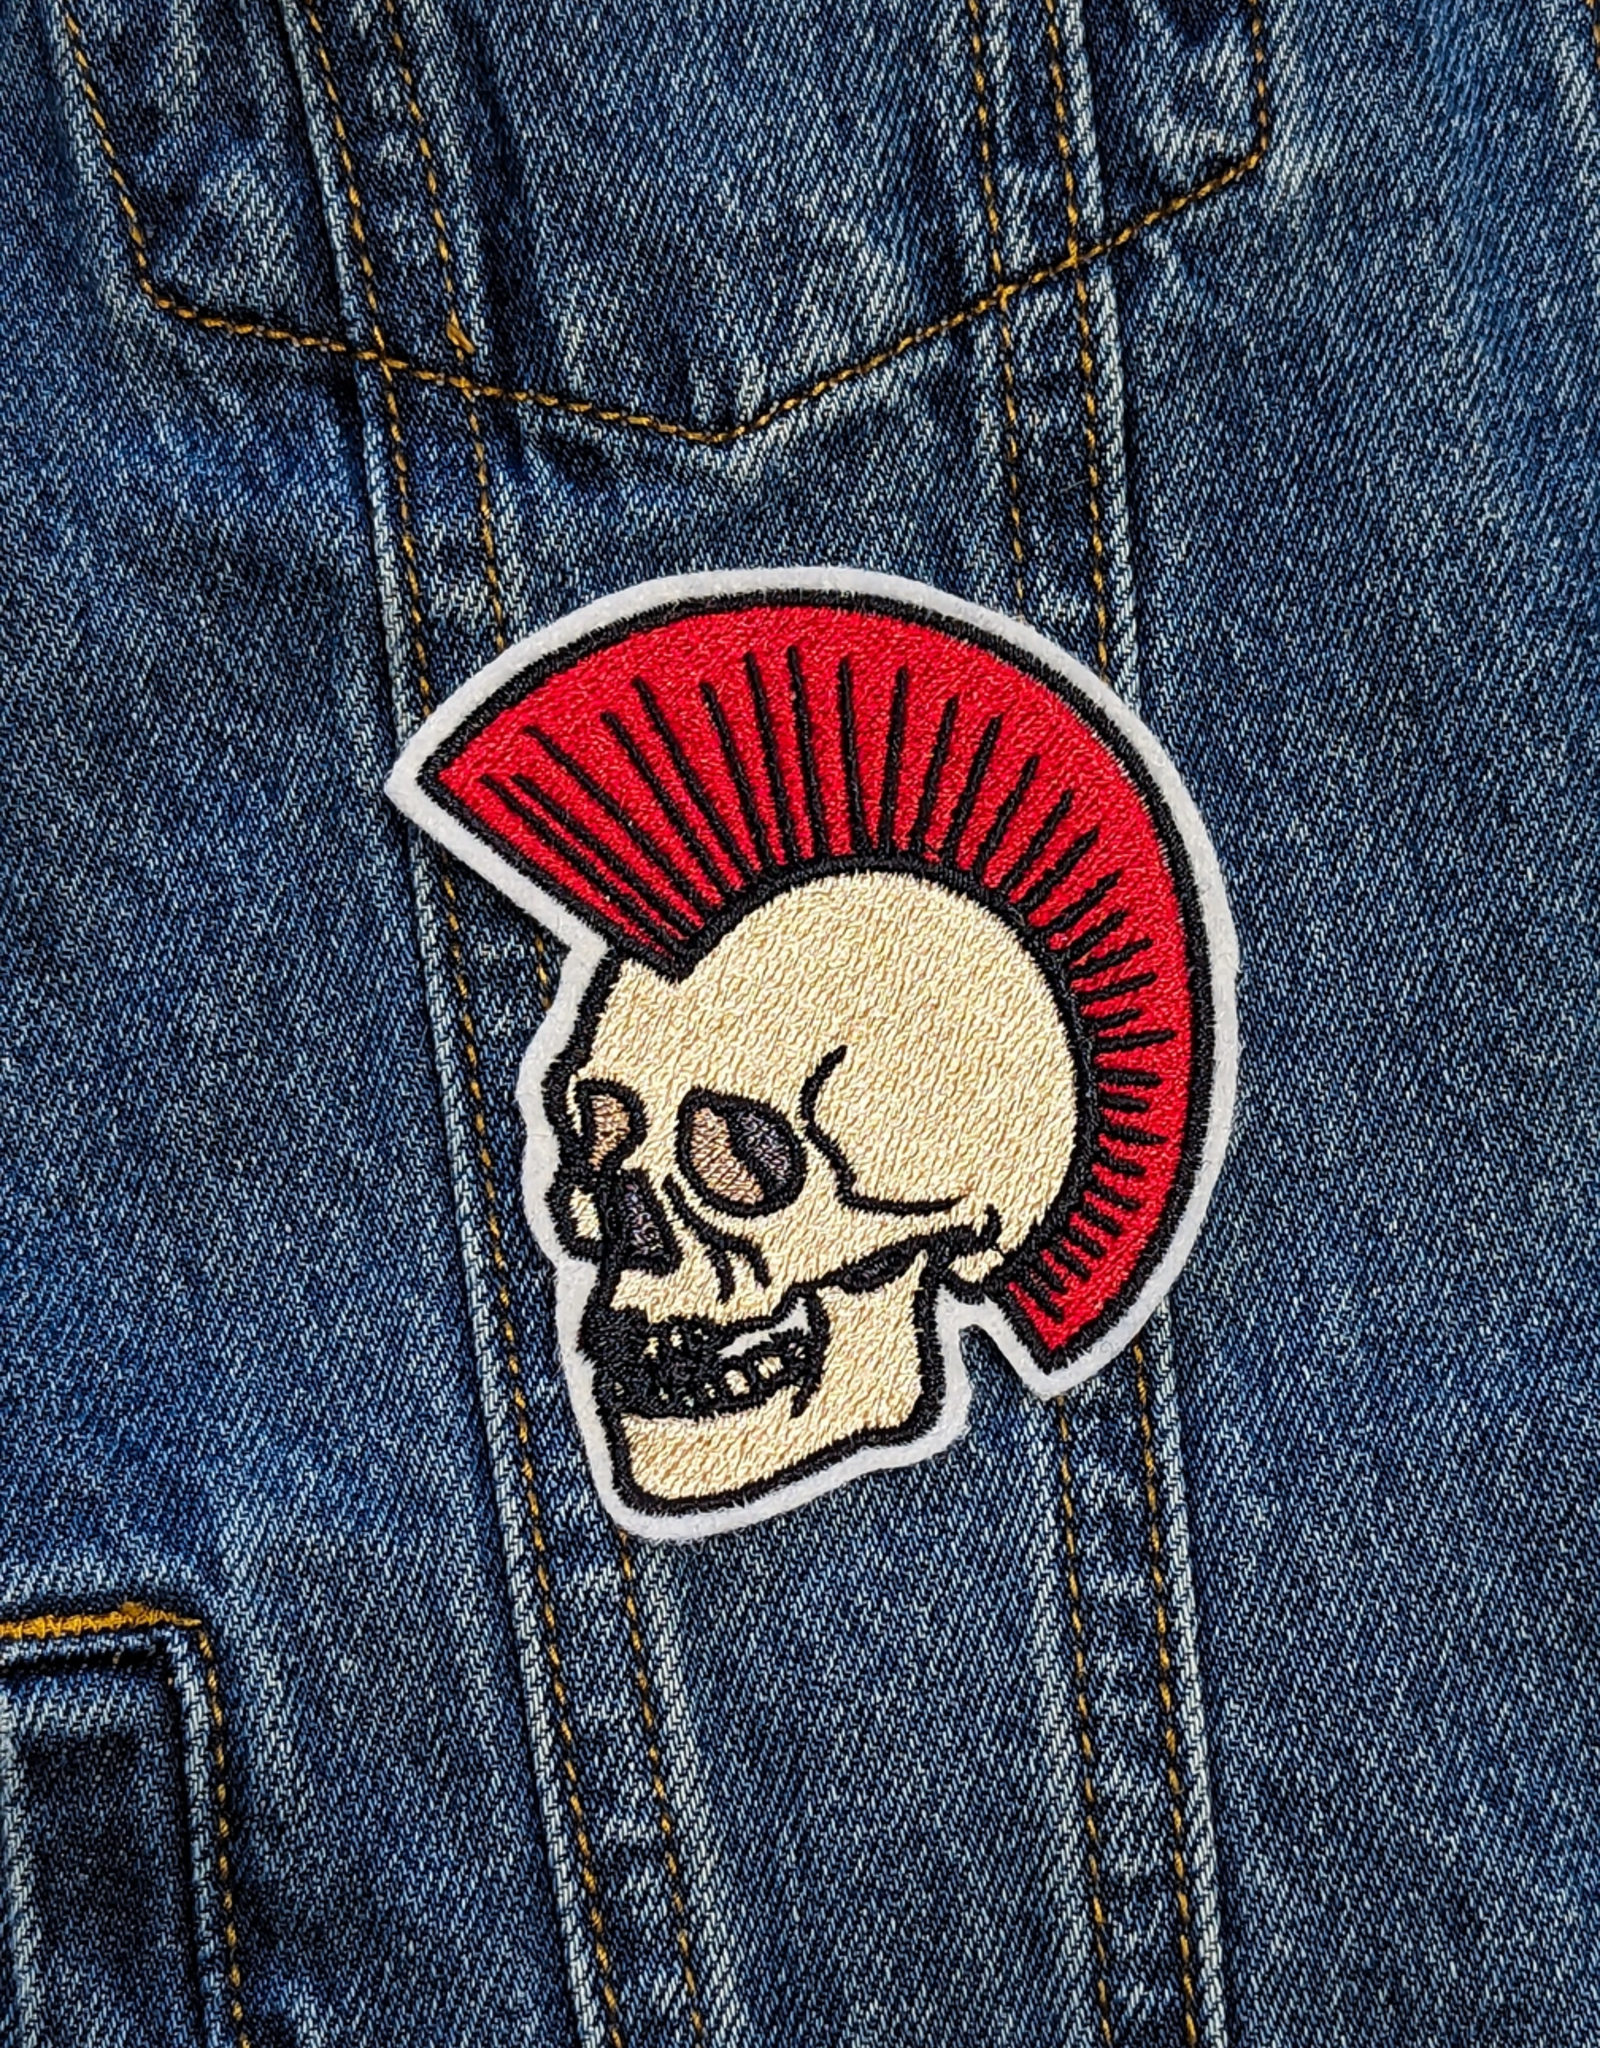 Punk Mohawk Skull Iron On Embroidered Patch